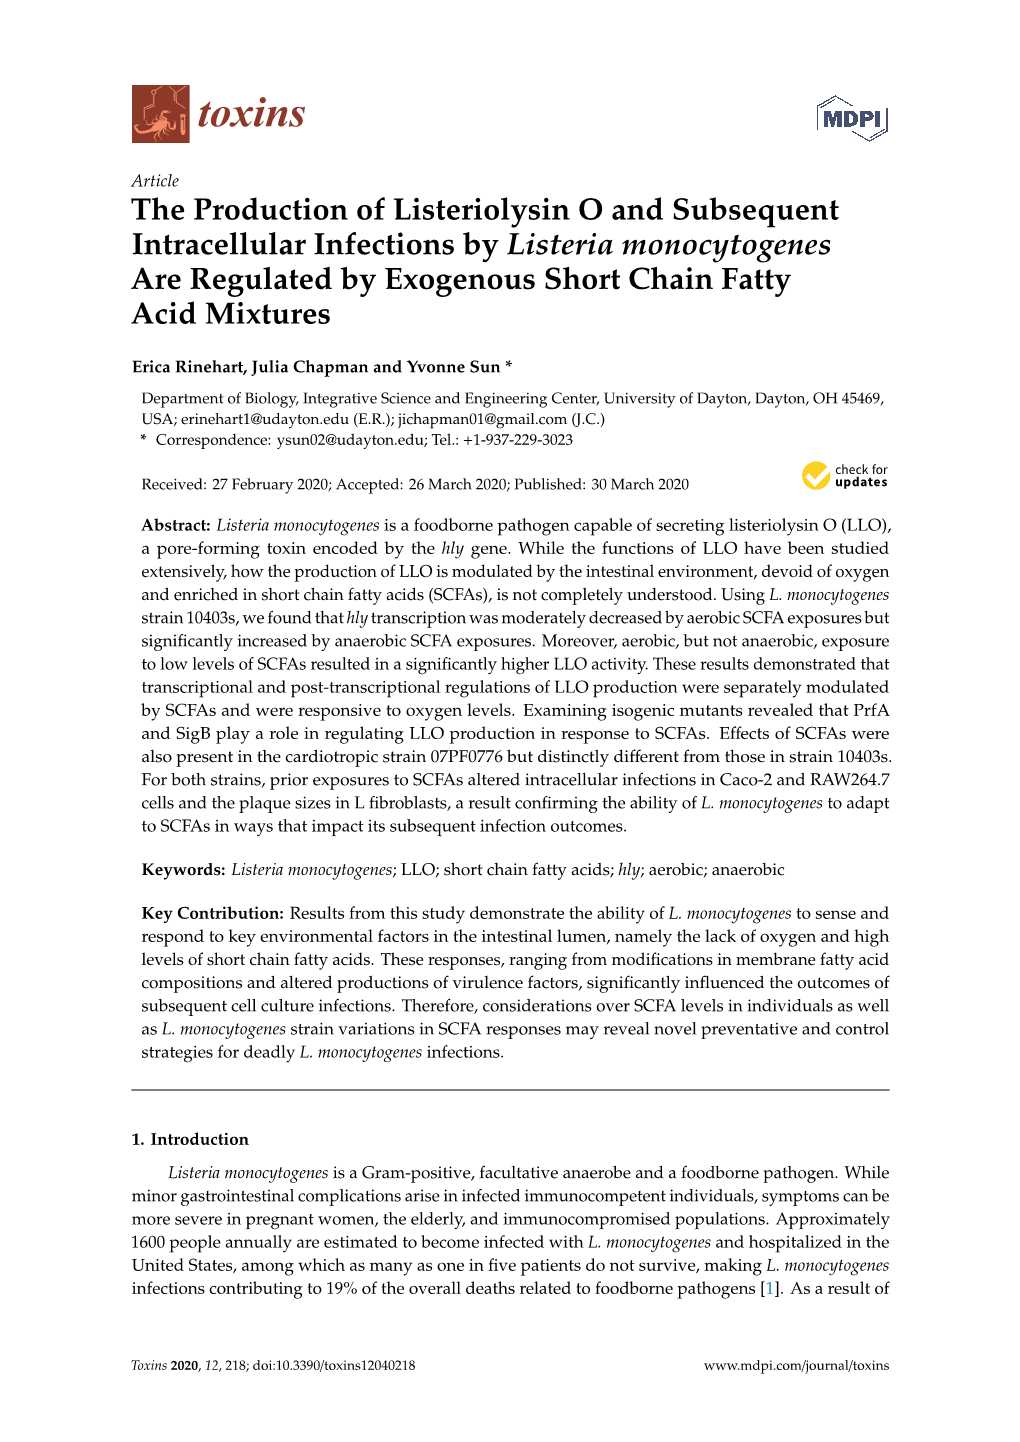 The Production of Listeriolysin O and Subsequent Intracellular Infections by Listeria Monocytogenes Are Regulated by Exogenous Short Chain Fatty Acid Mixtures